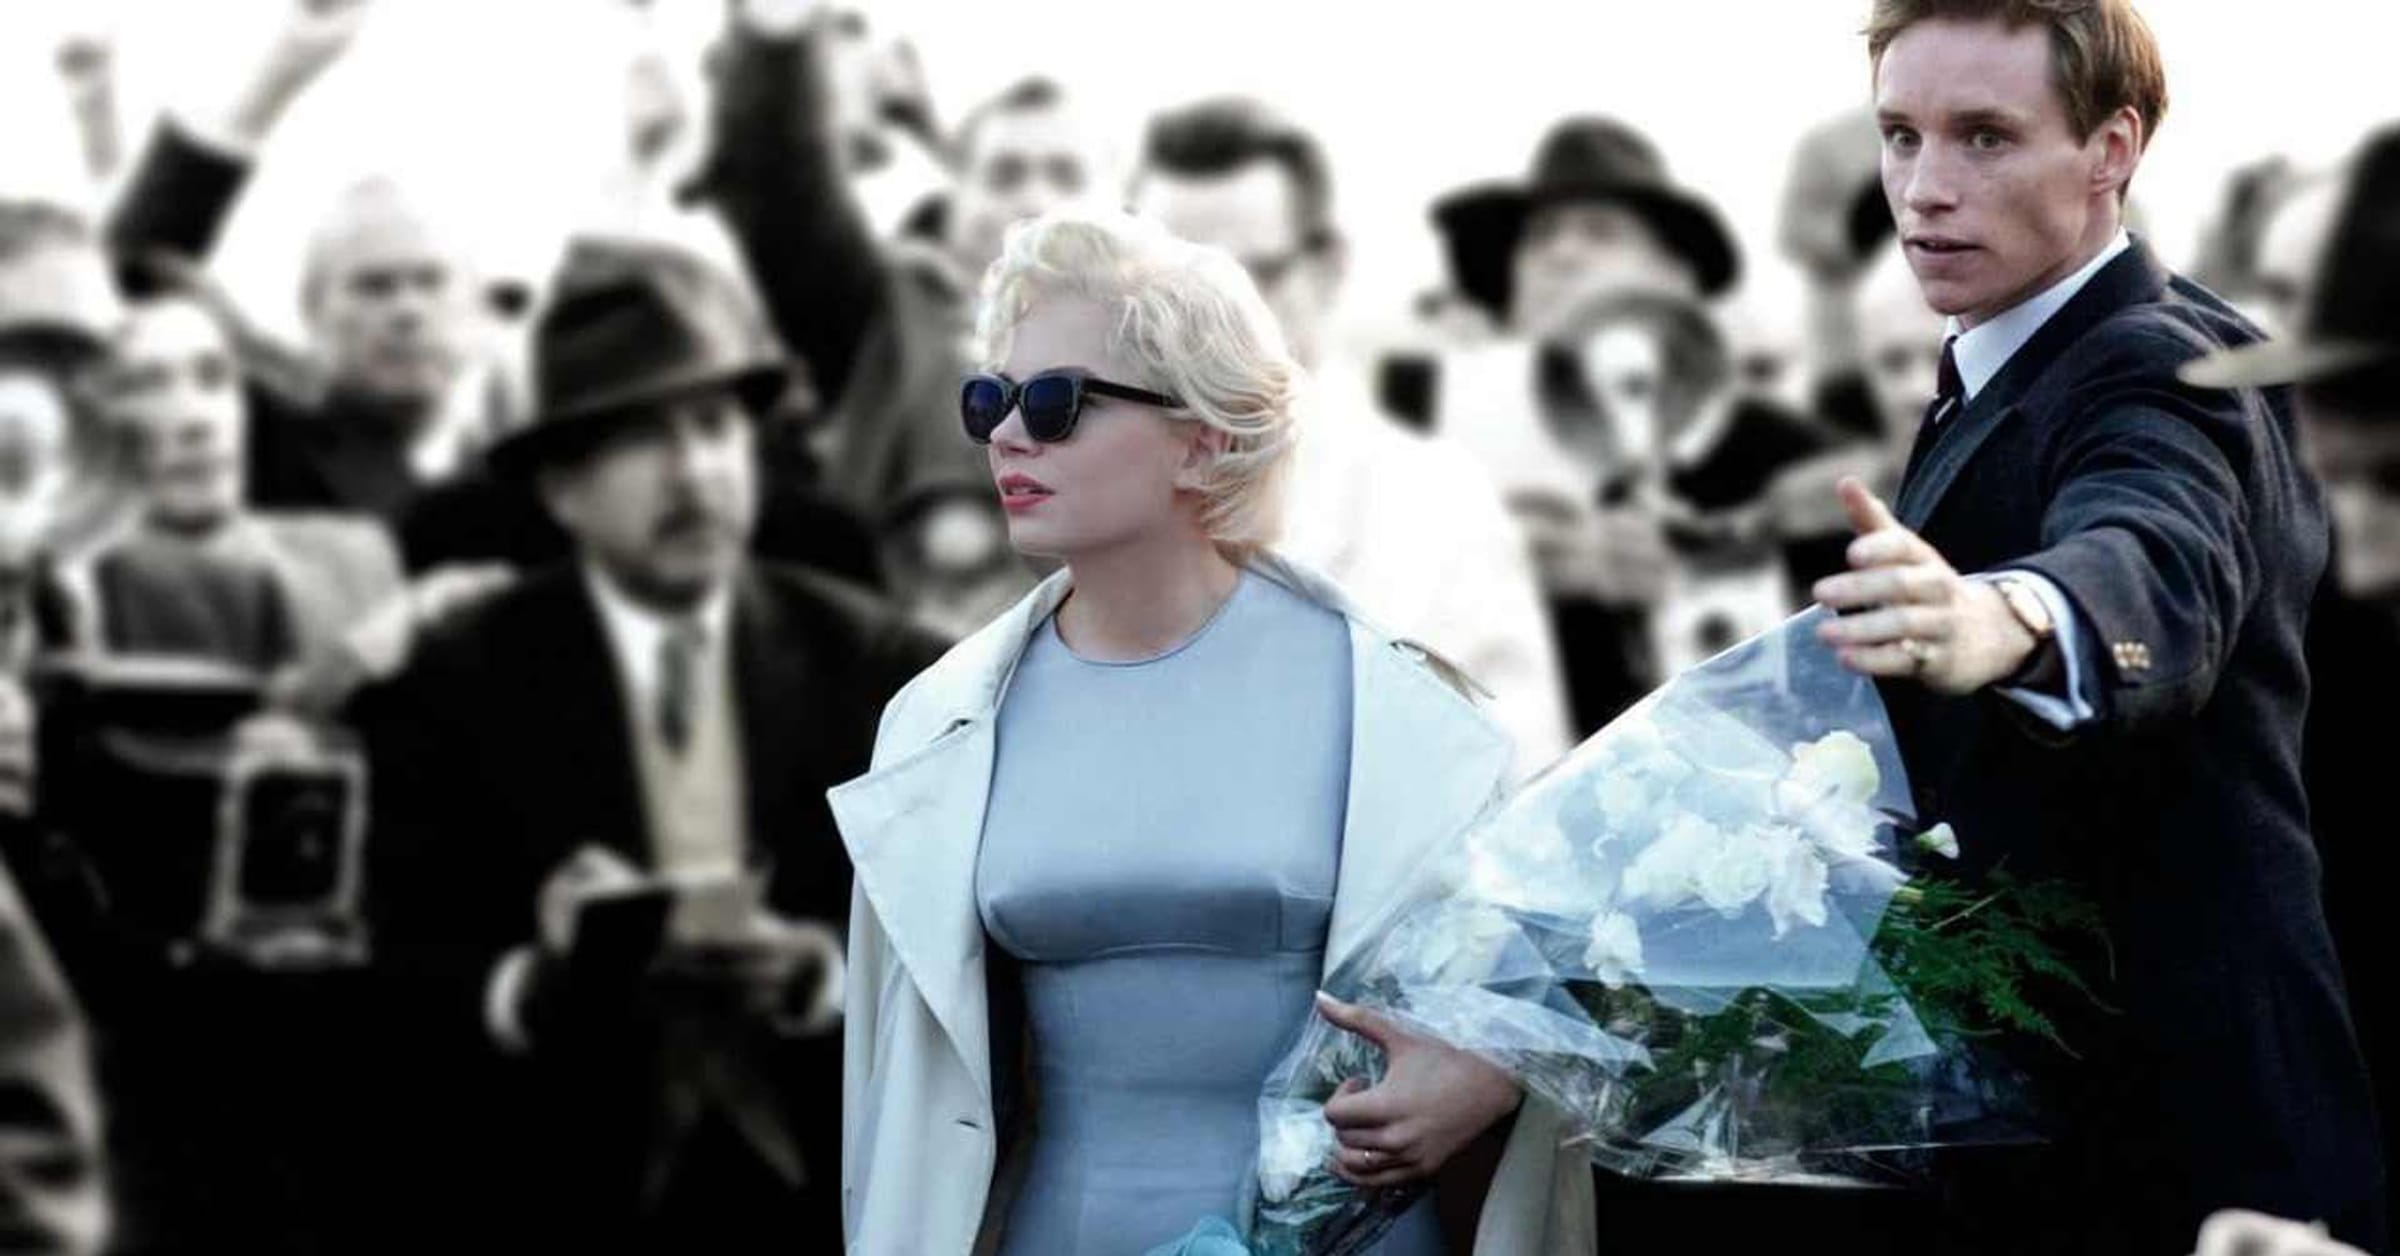 The Untold Story Behind an Iconic Marilyn Monroe Moment